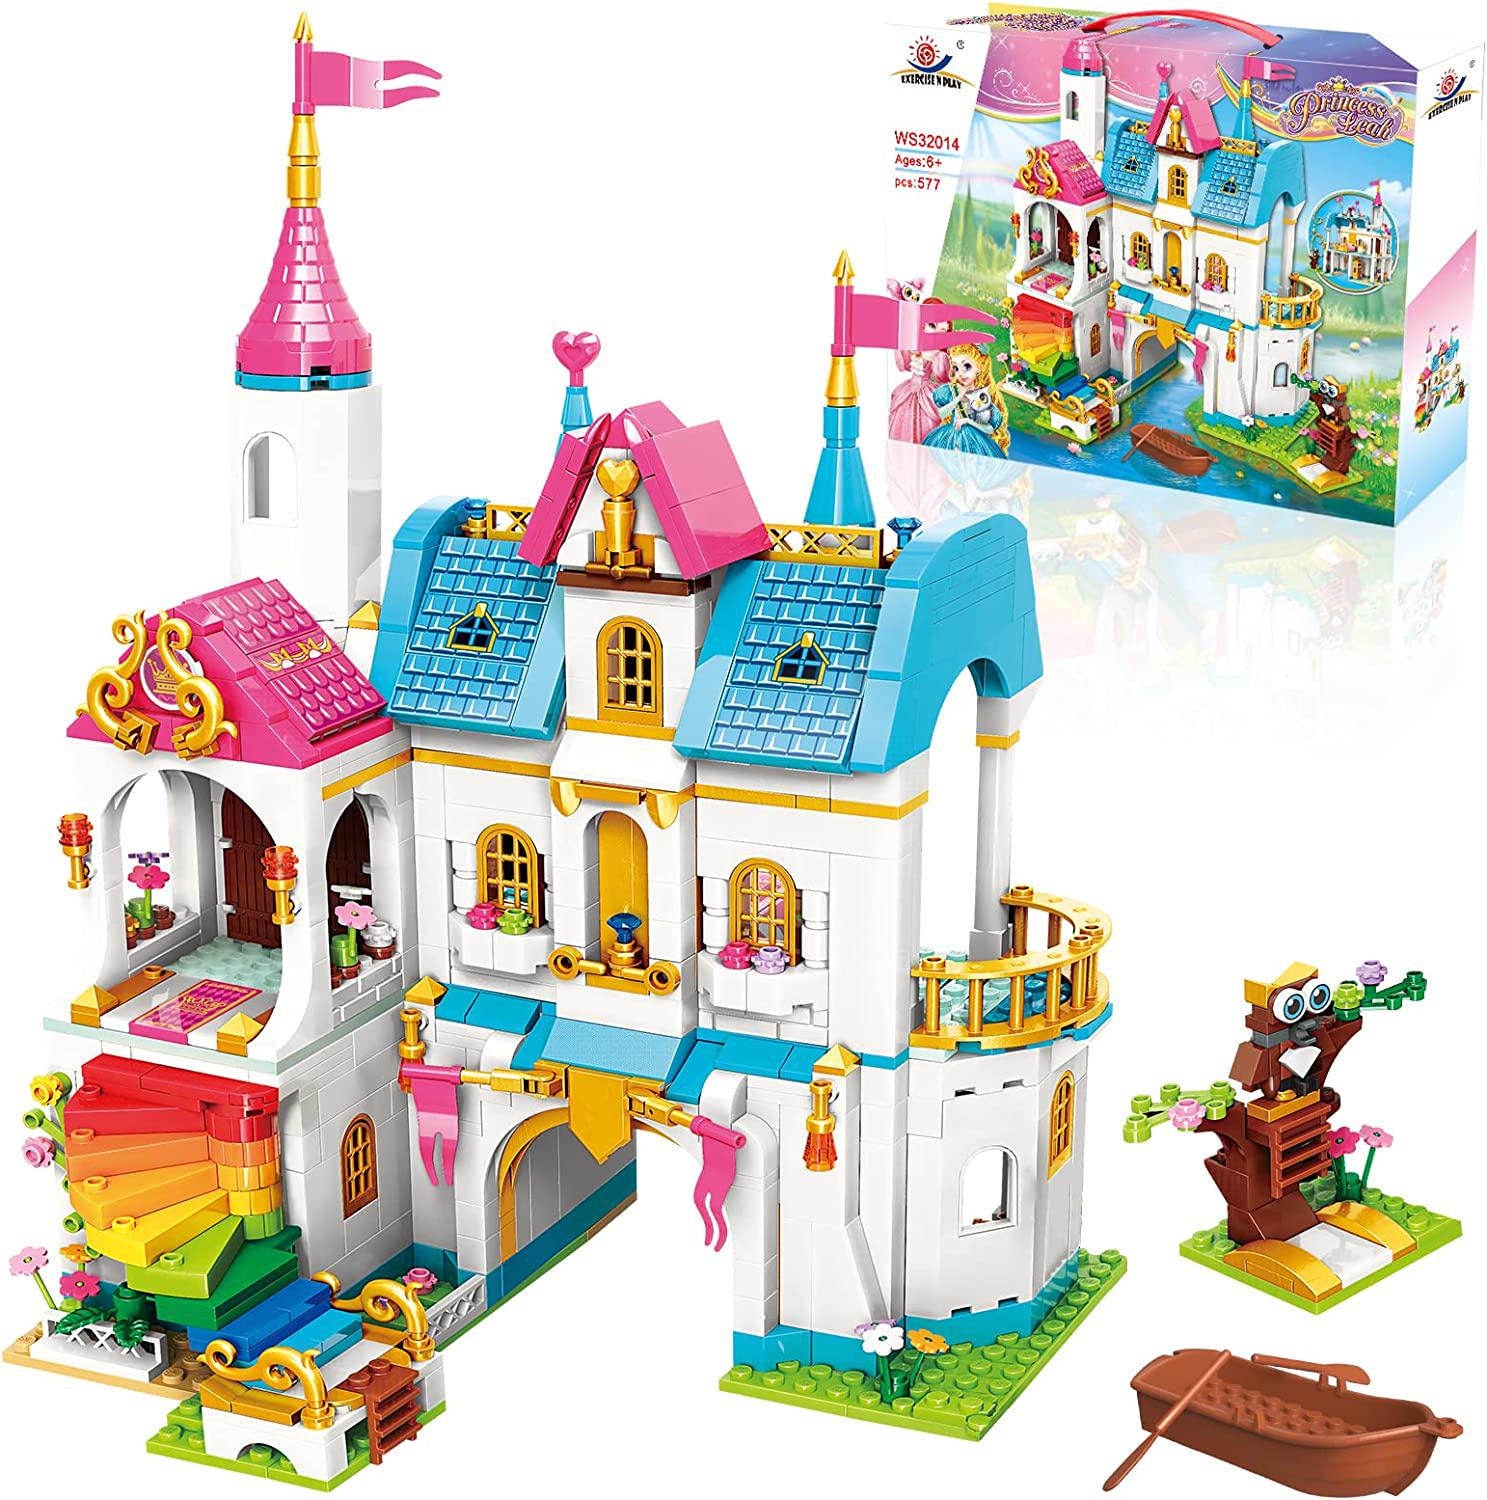 EP EXERCISE N PLAY, Rainbow Castle Building Kit Building Blocks Toys Set for Ages 6-12 Girls Boys, STEM DIY Construction Roleplay Gift